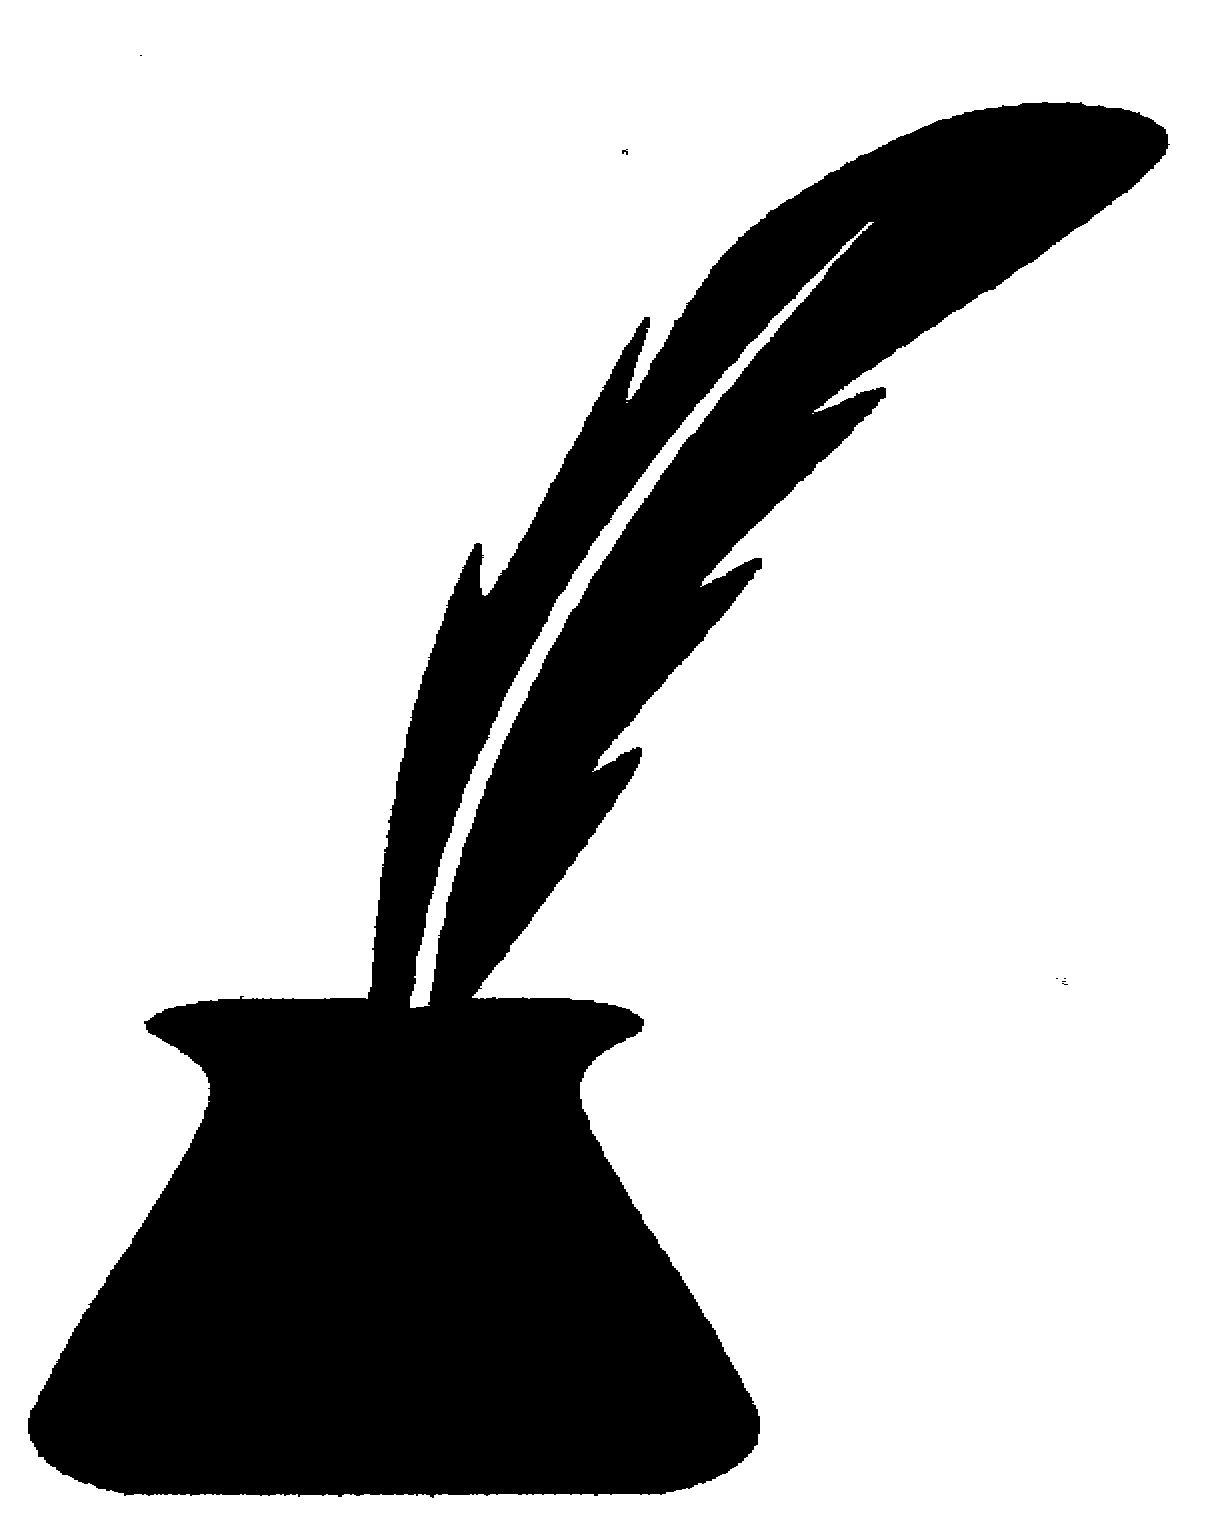 feathers clipart ink